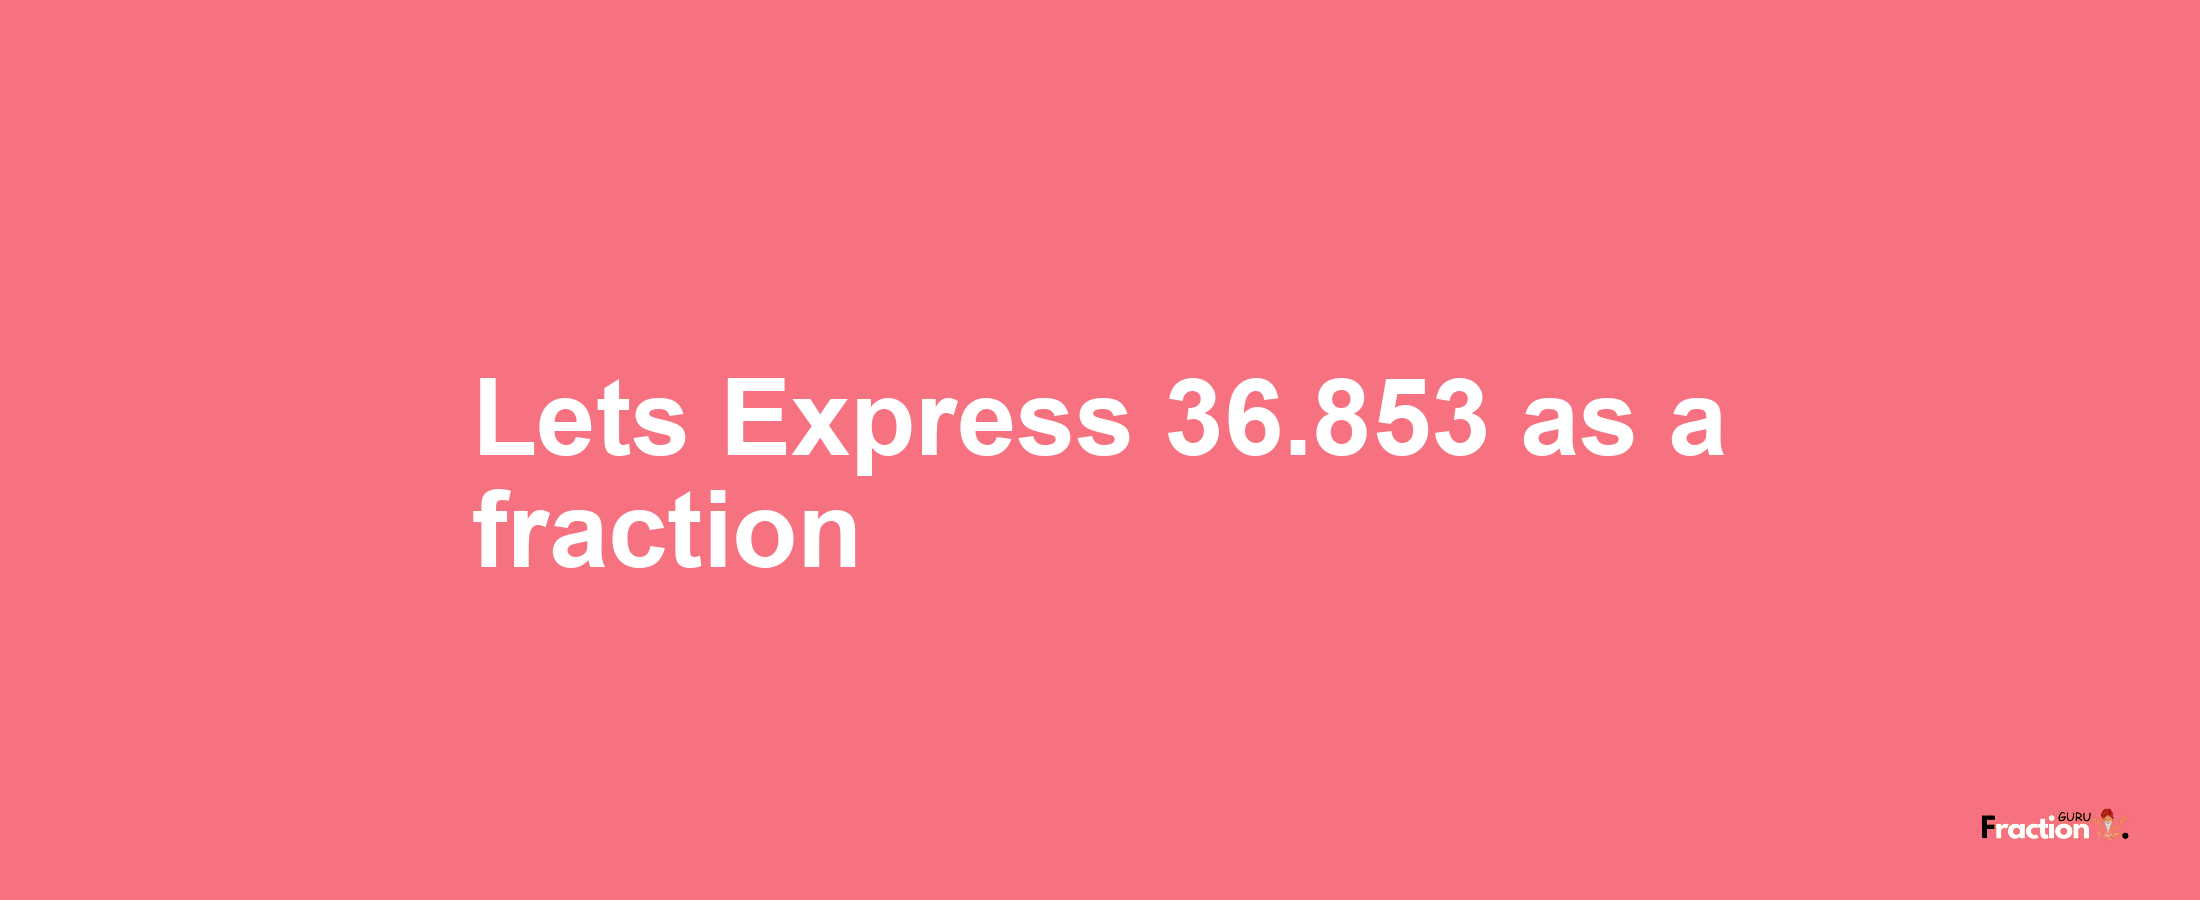 Lets Express 36.853 as afraction